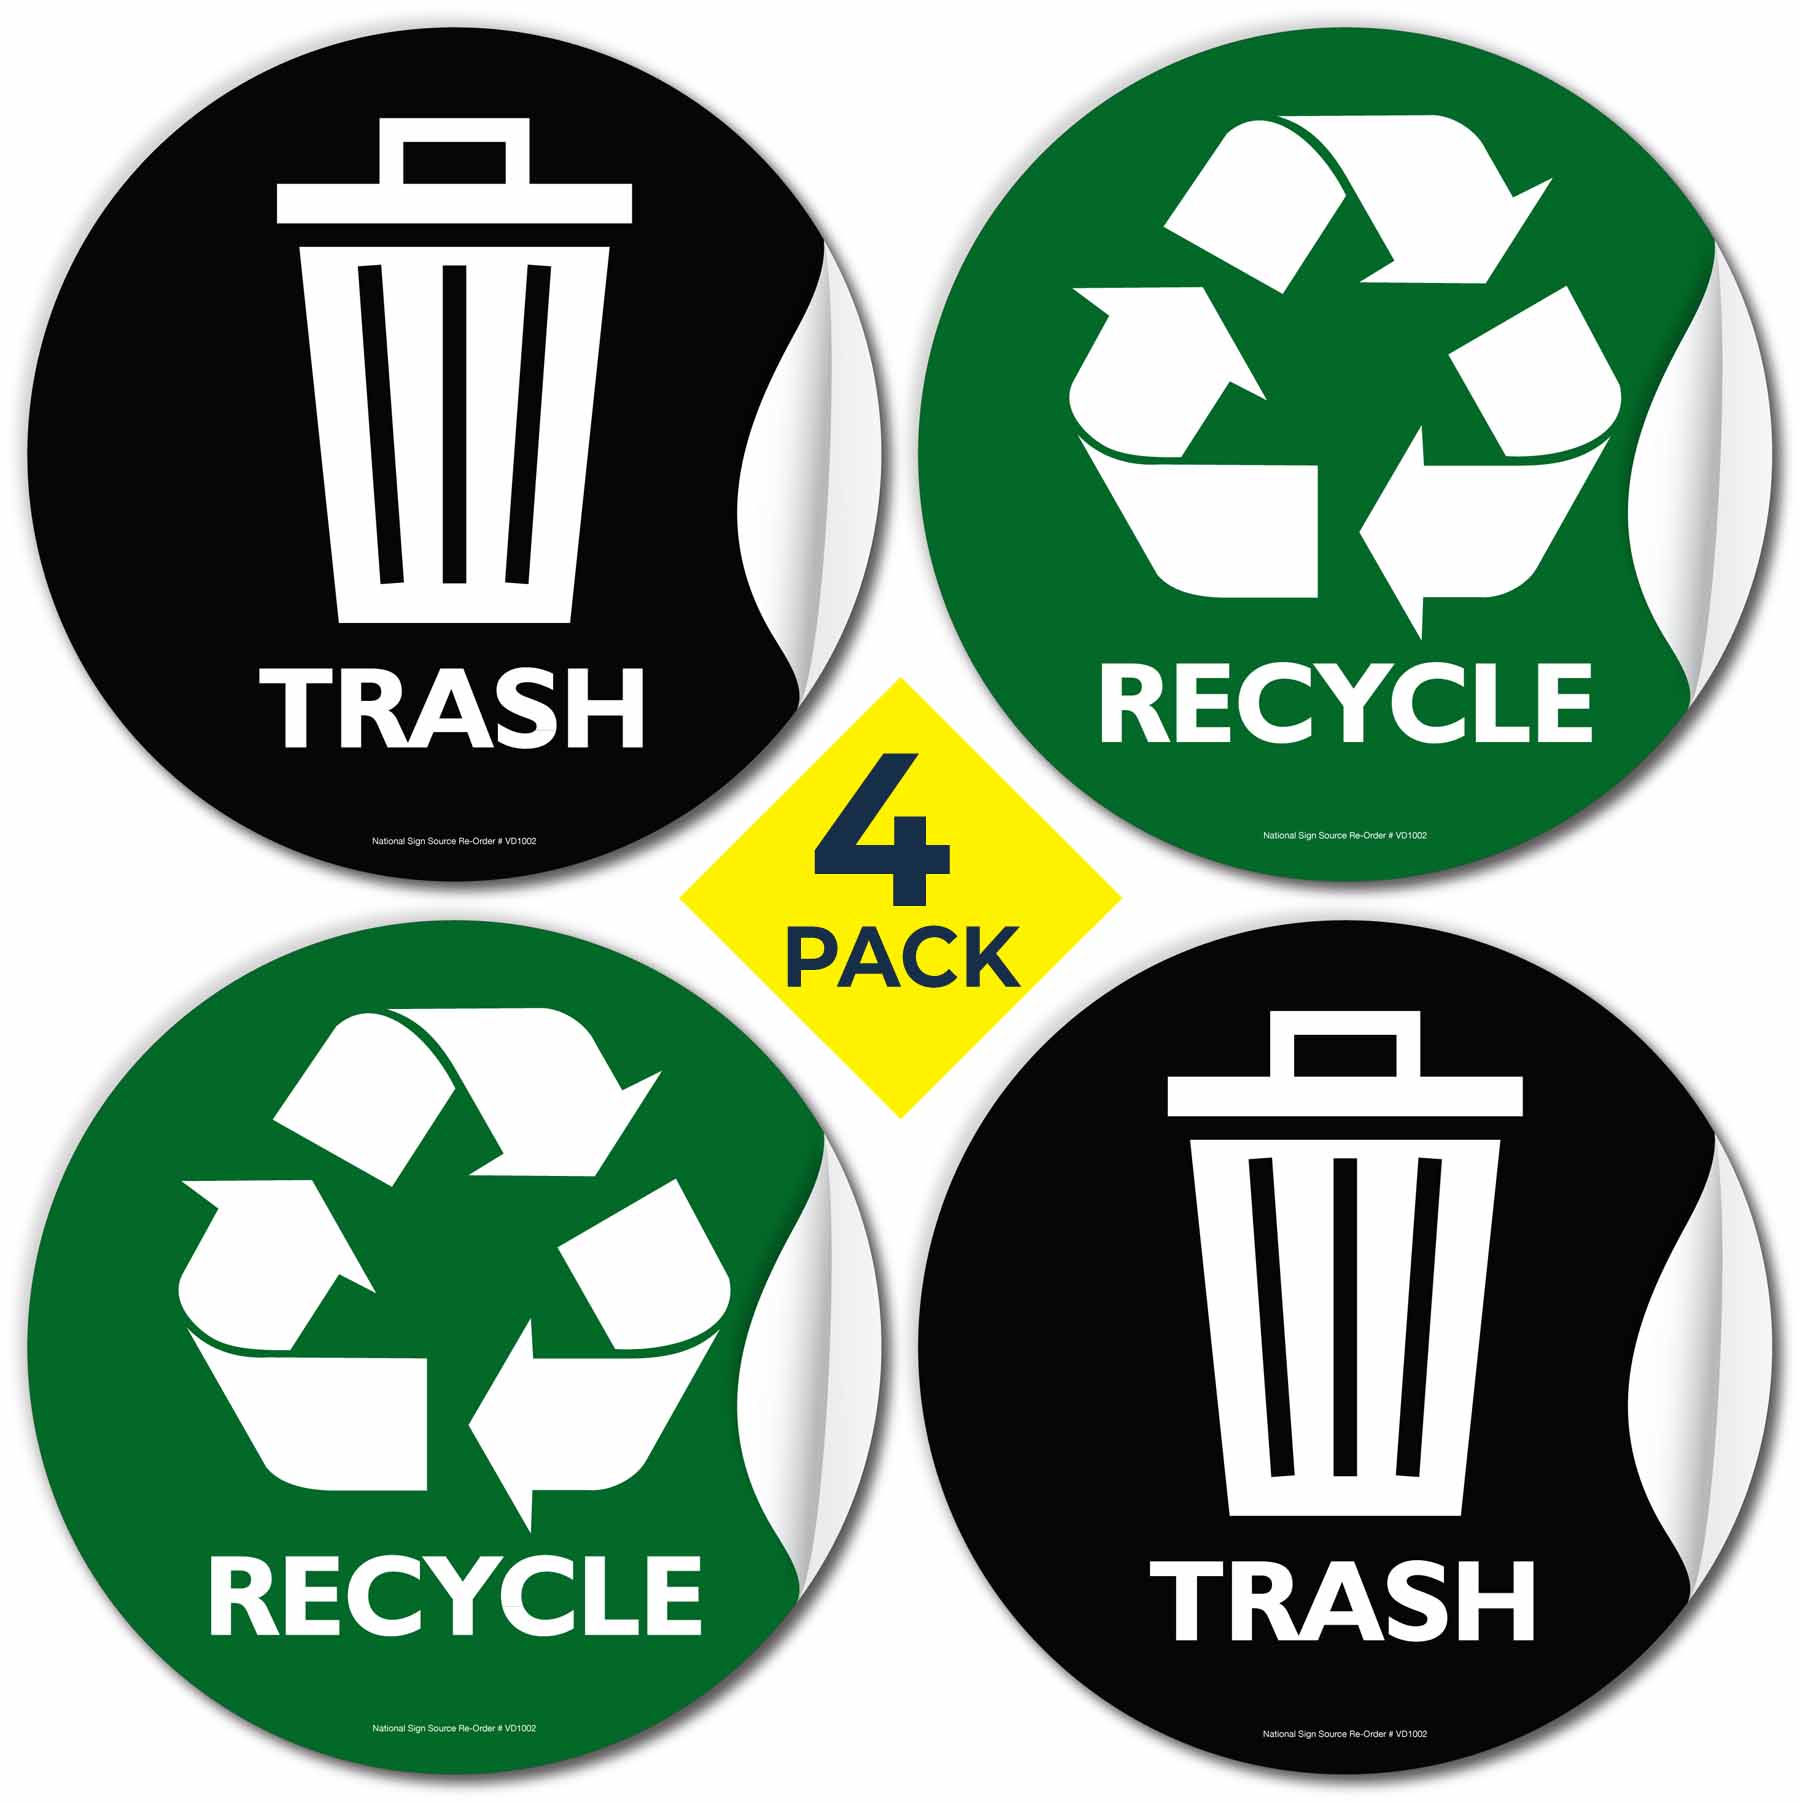 Recycle and trash bin vinyl sign stickers.  Place these on or near containers for garbage and recycling